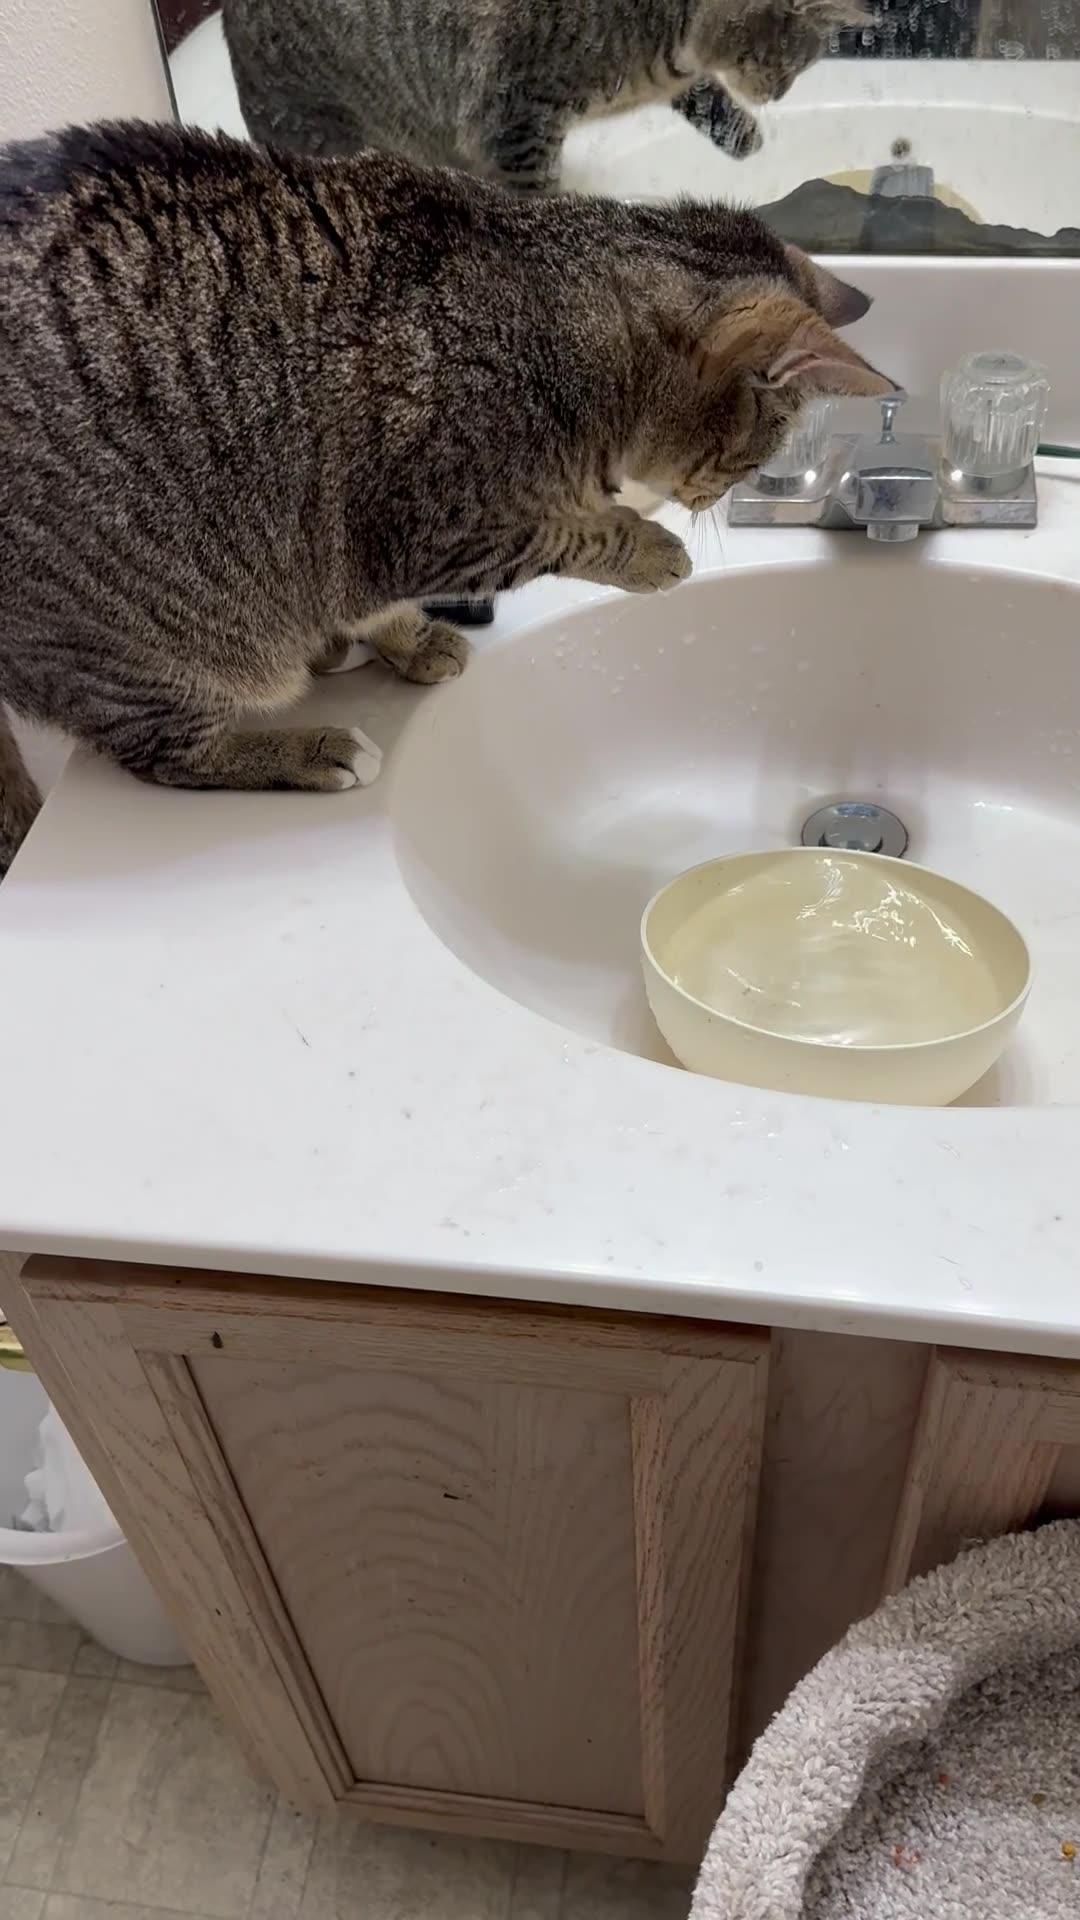 Cat Tries to Catch Water